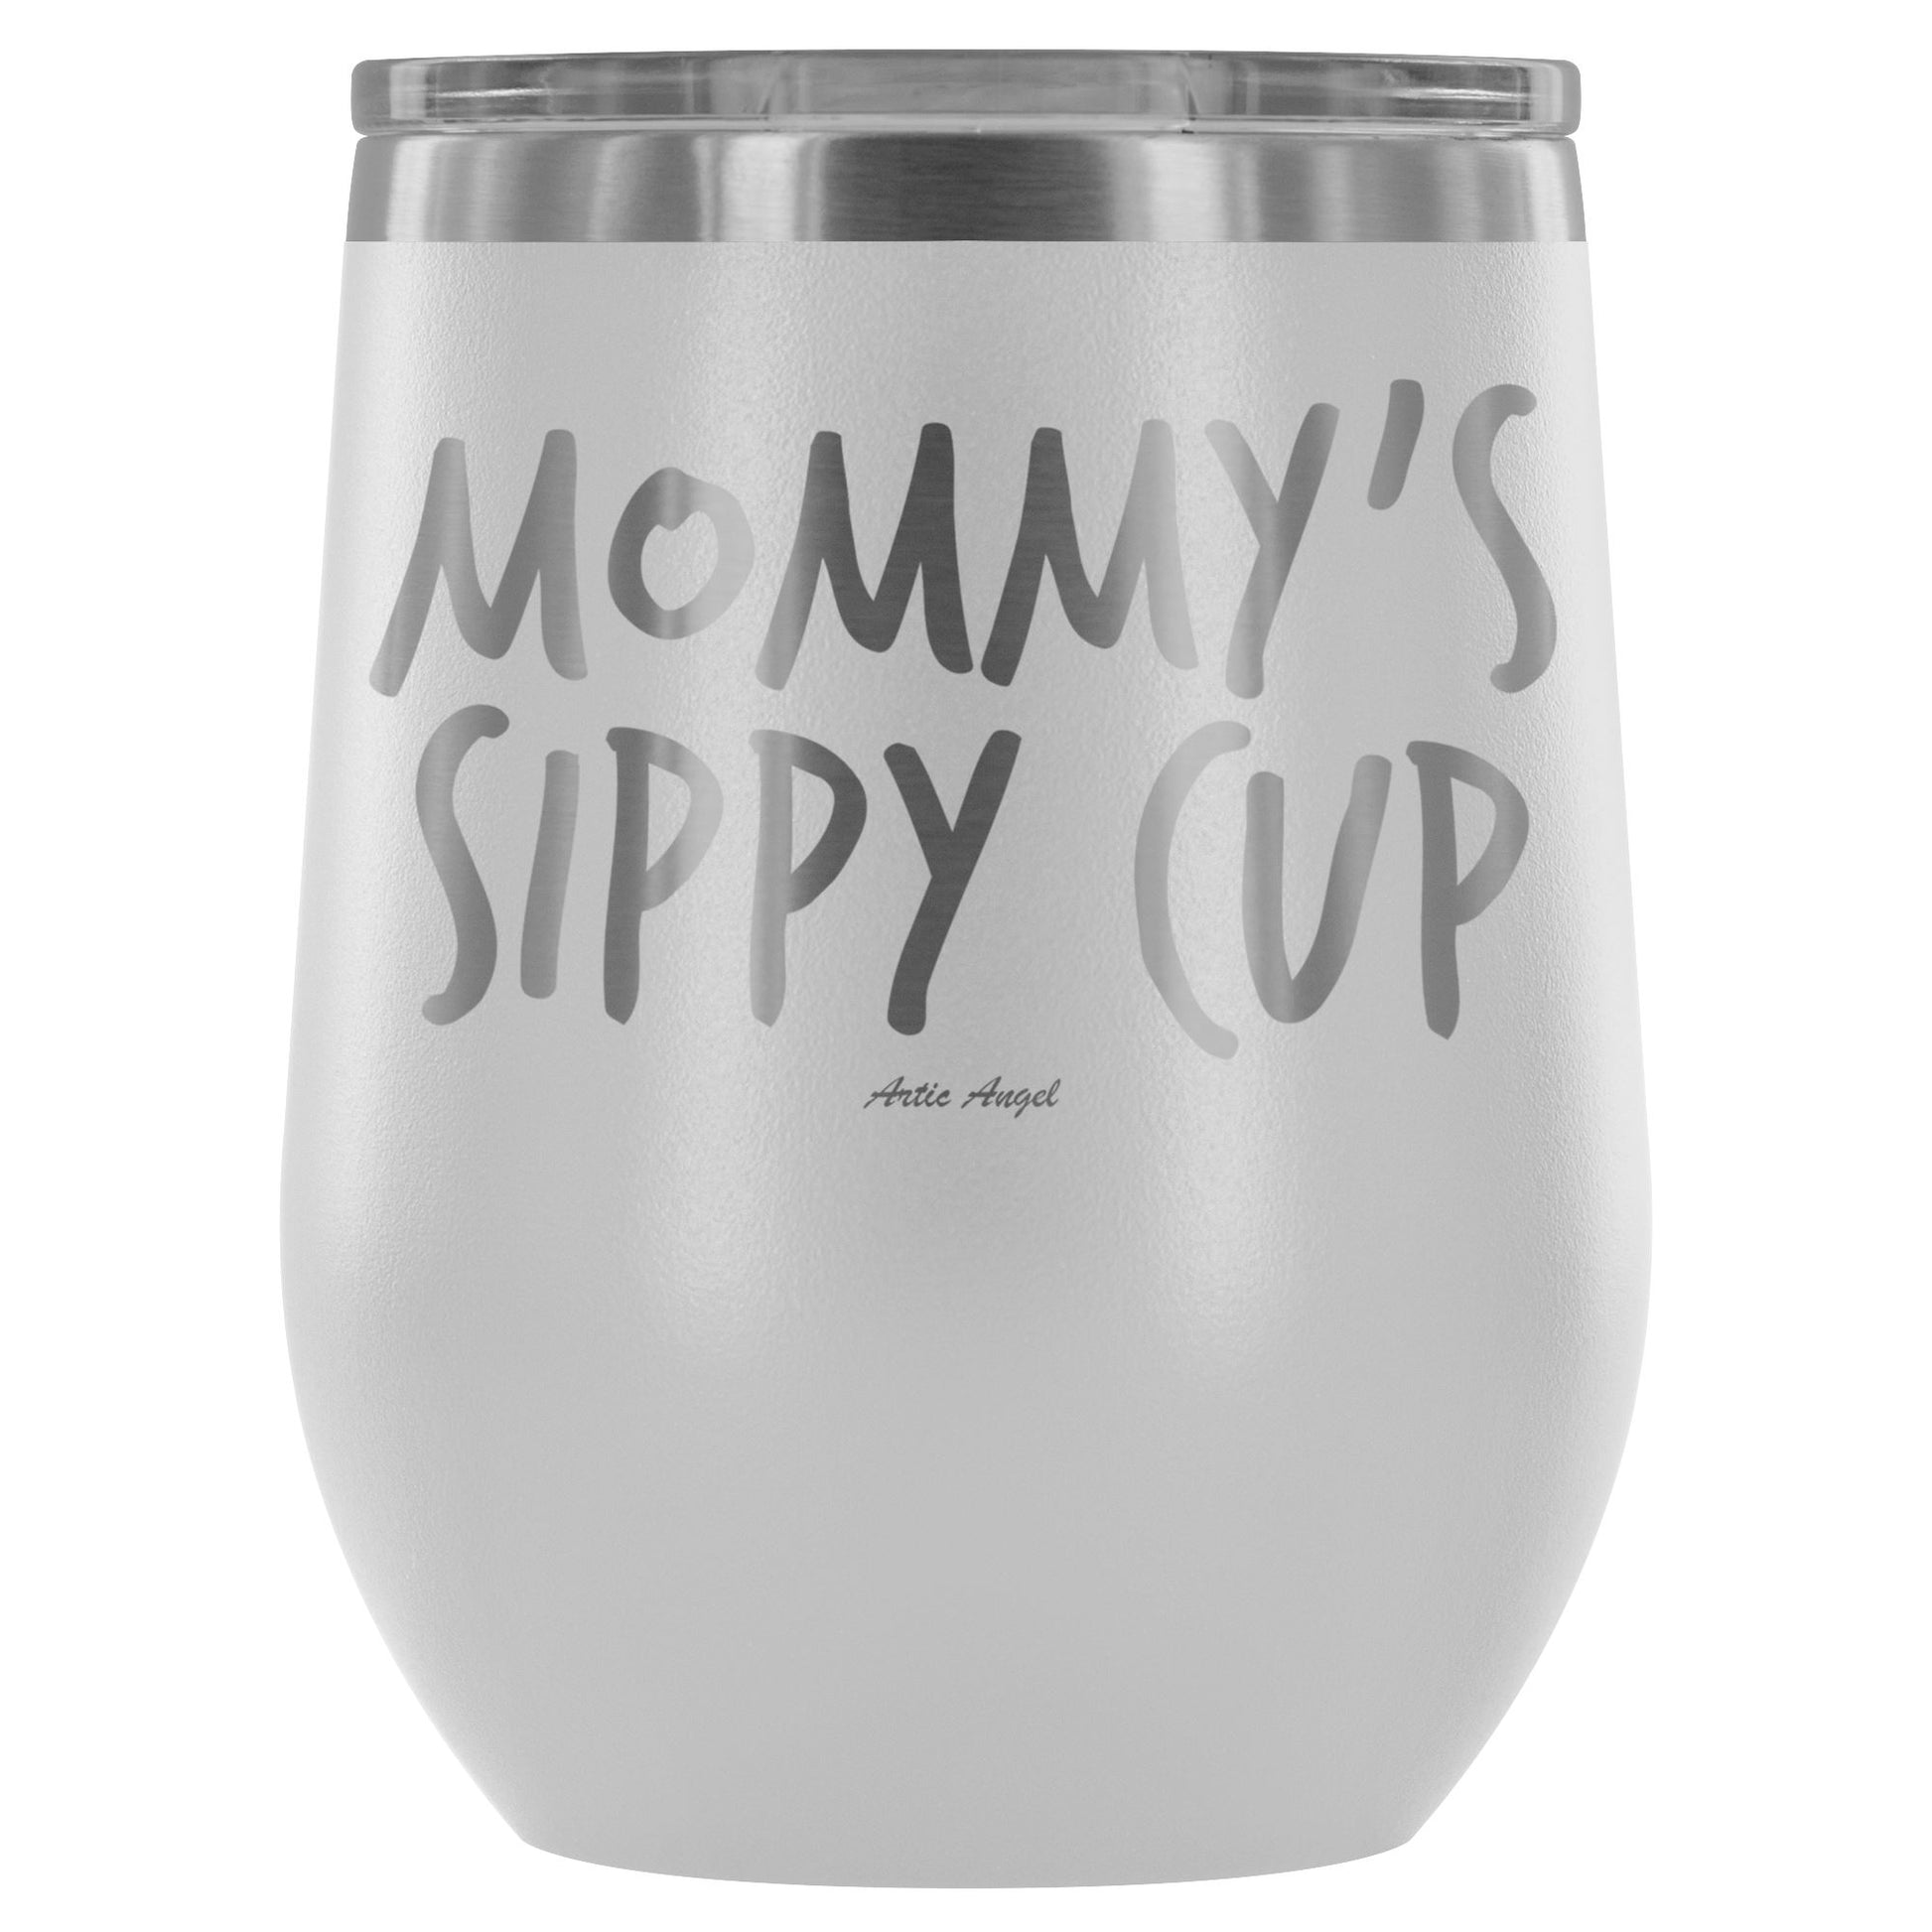 "Mommy's Sippy Cup" - Stemless Wine Cup Wine Tumbler White 